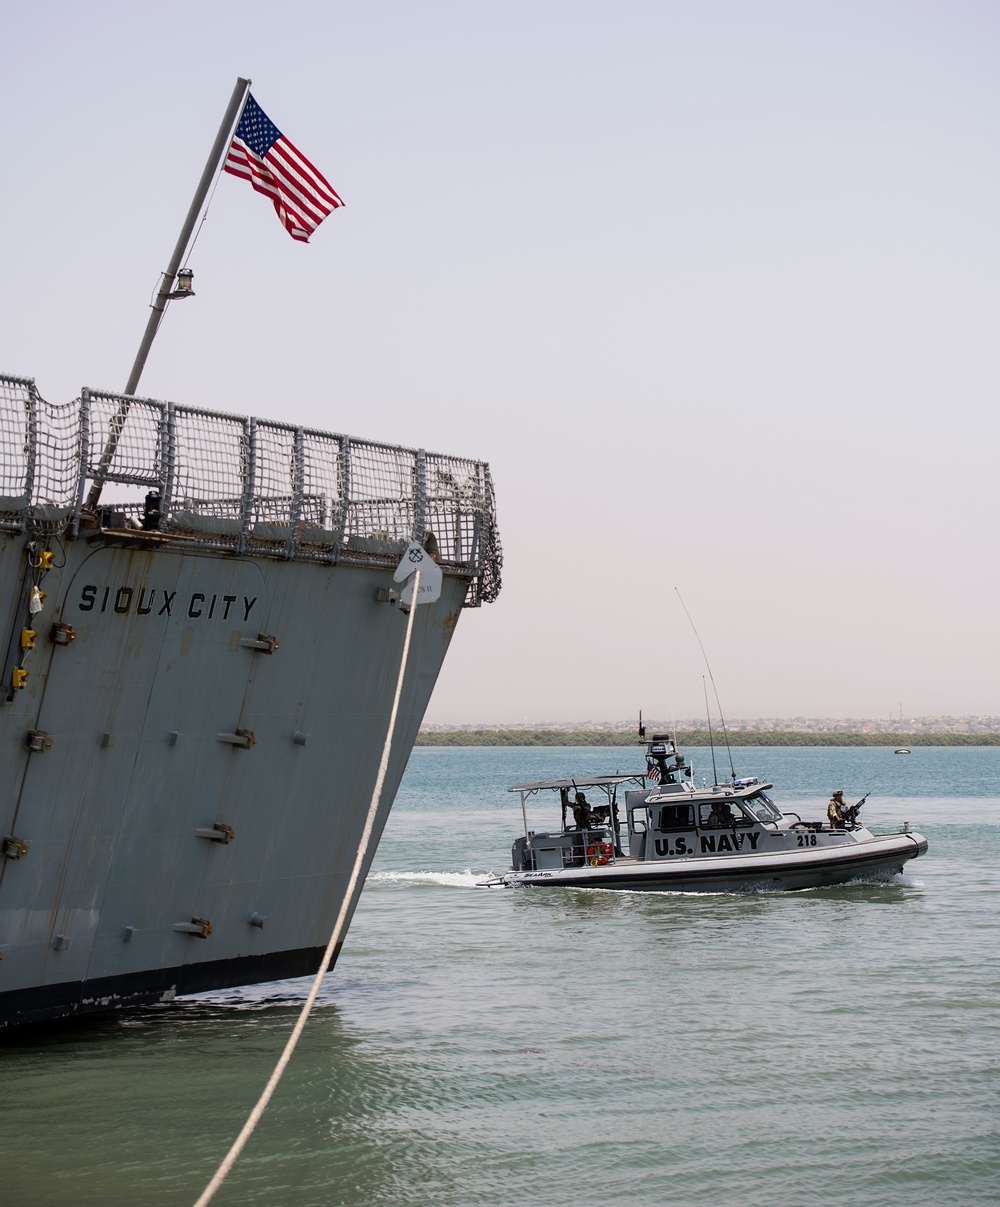 Sioux City Pulls into Djibouti